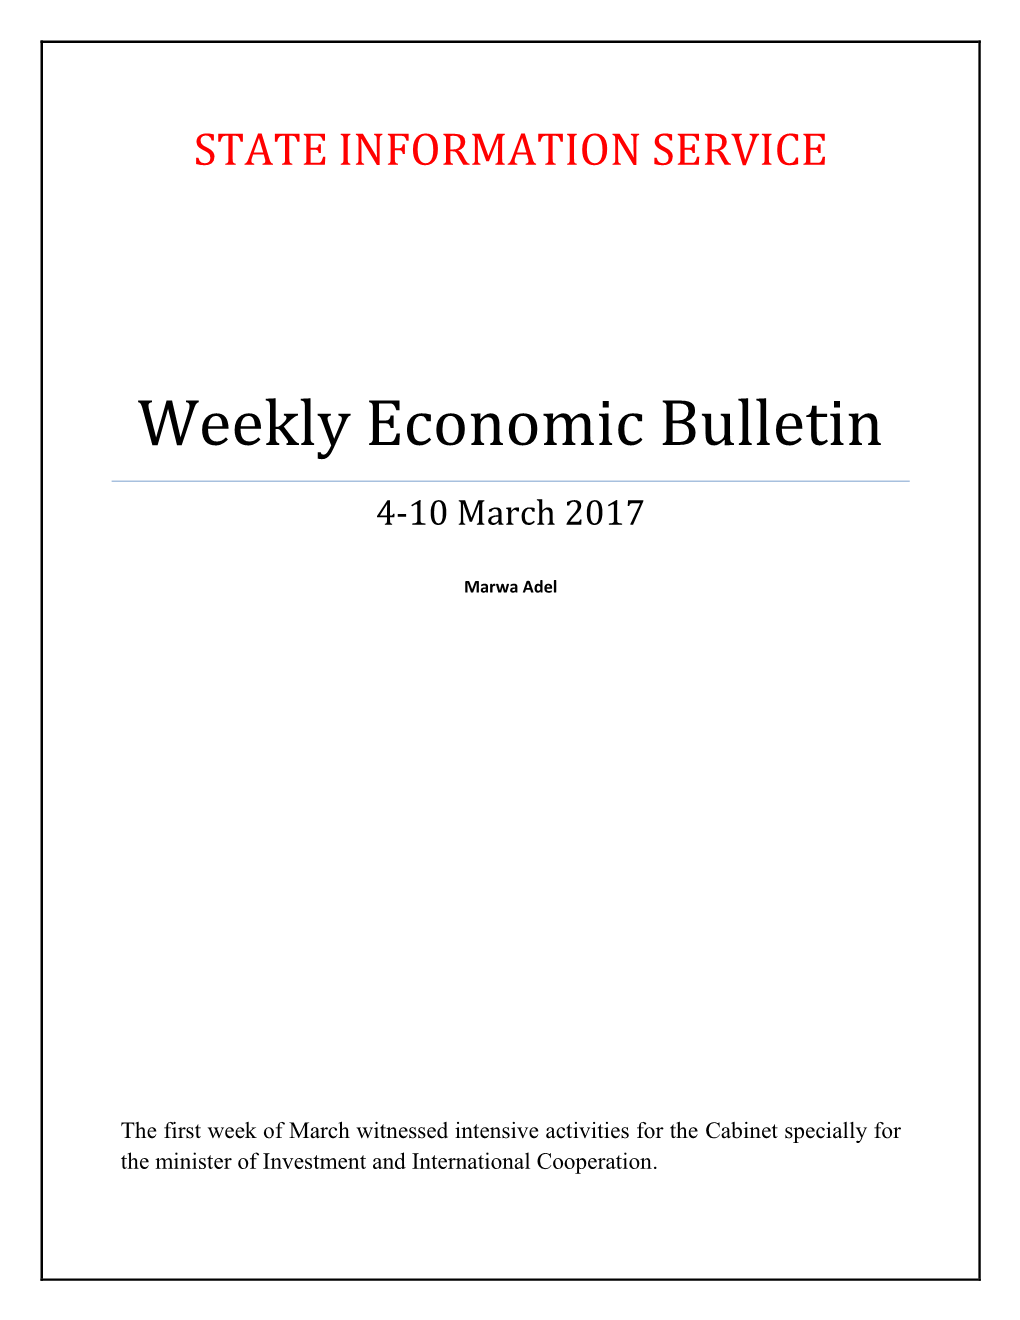 Weekly Economic Bulletin 4-10 March 2017